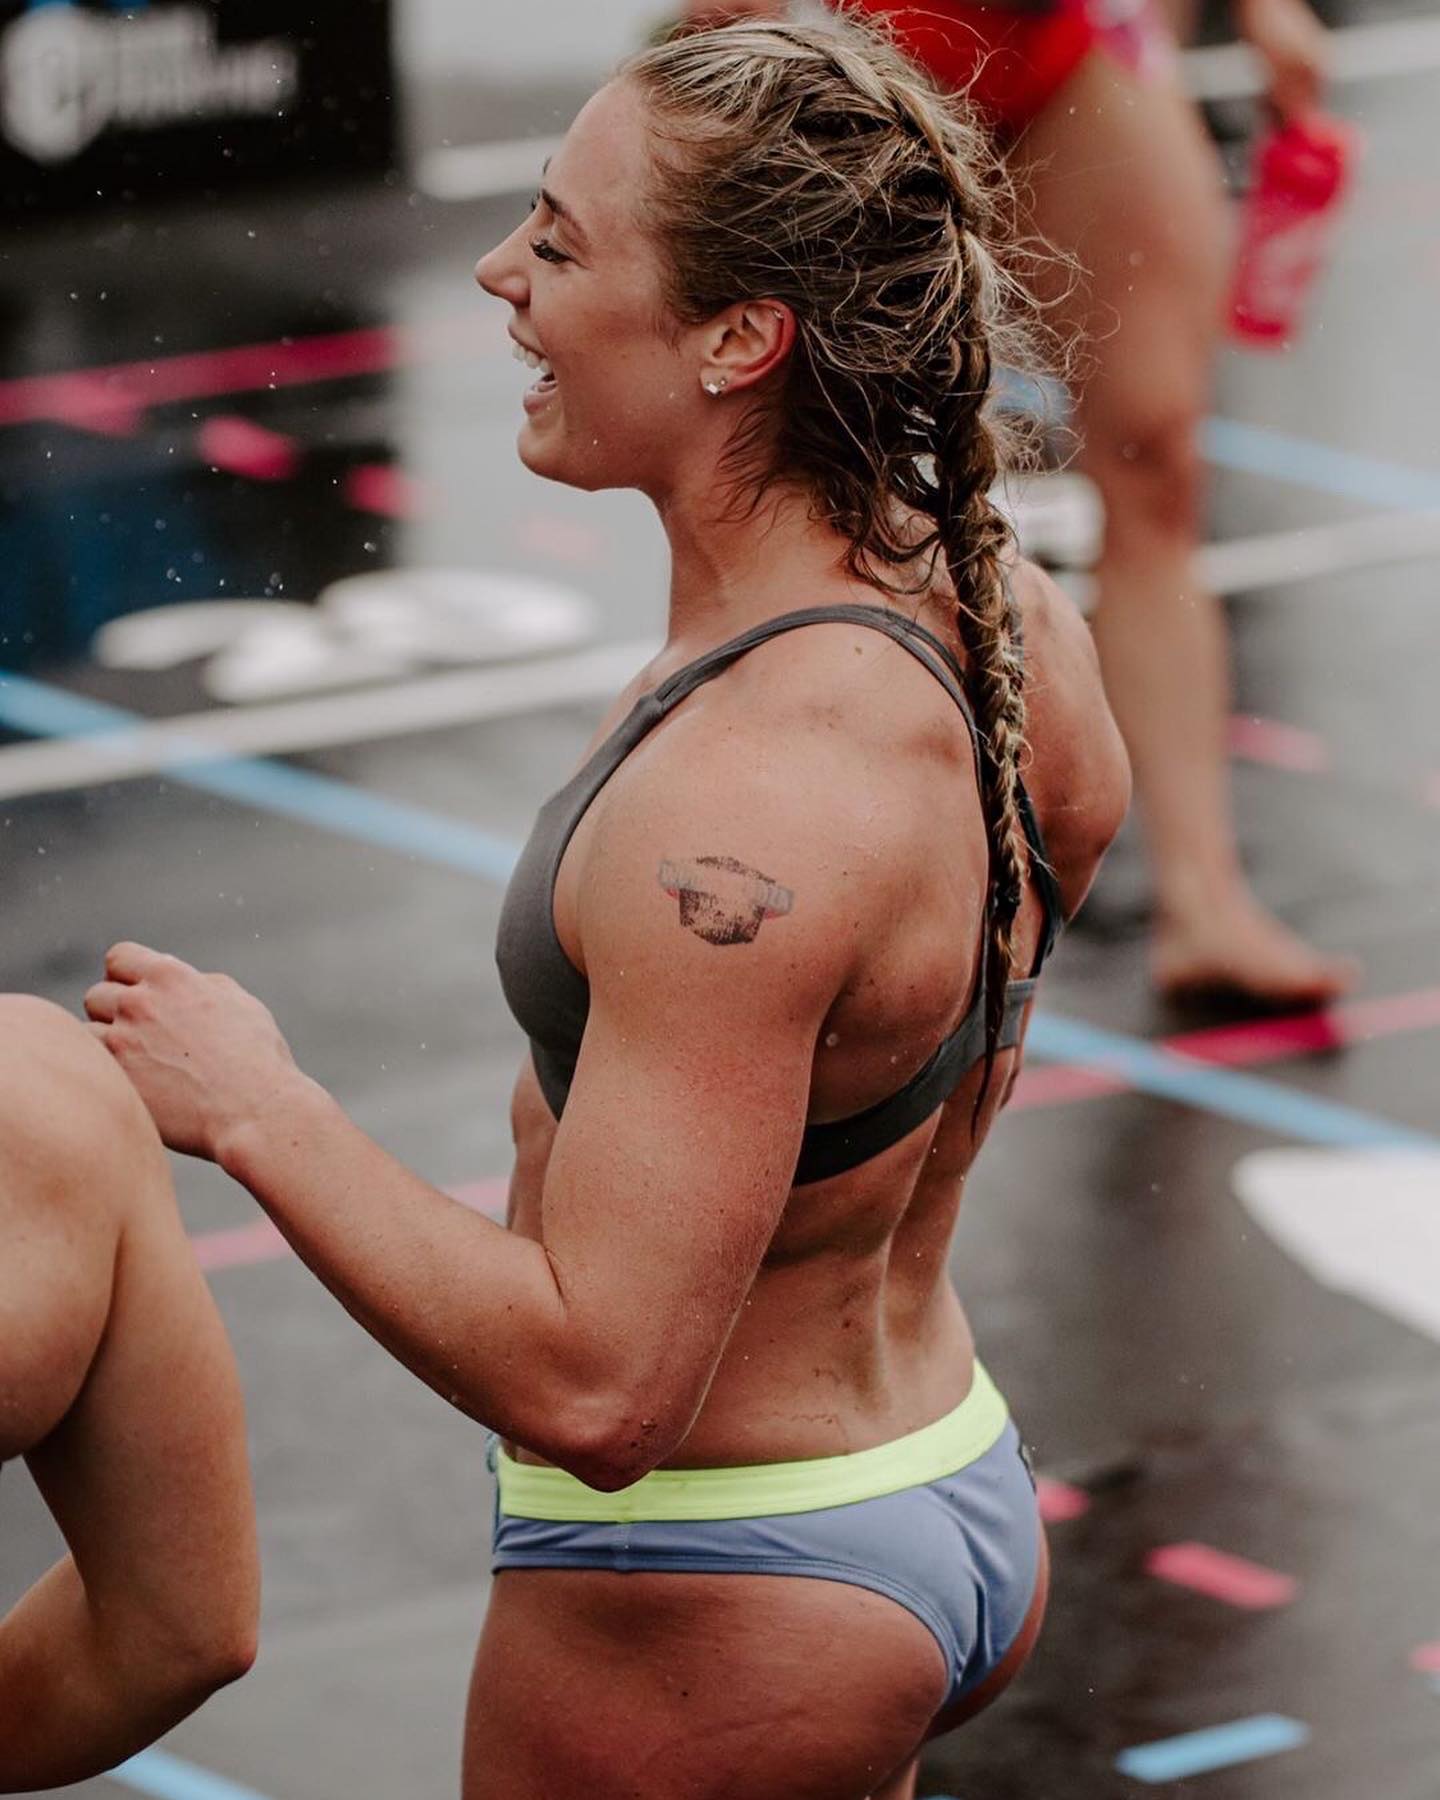 51 Brooke Wells Nude Pictures Are A Genuine Meaning Of Immaculate Badonkadonks | Best Of Comic Books